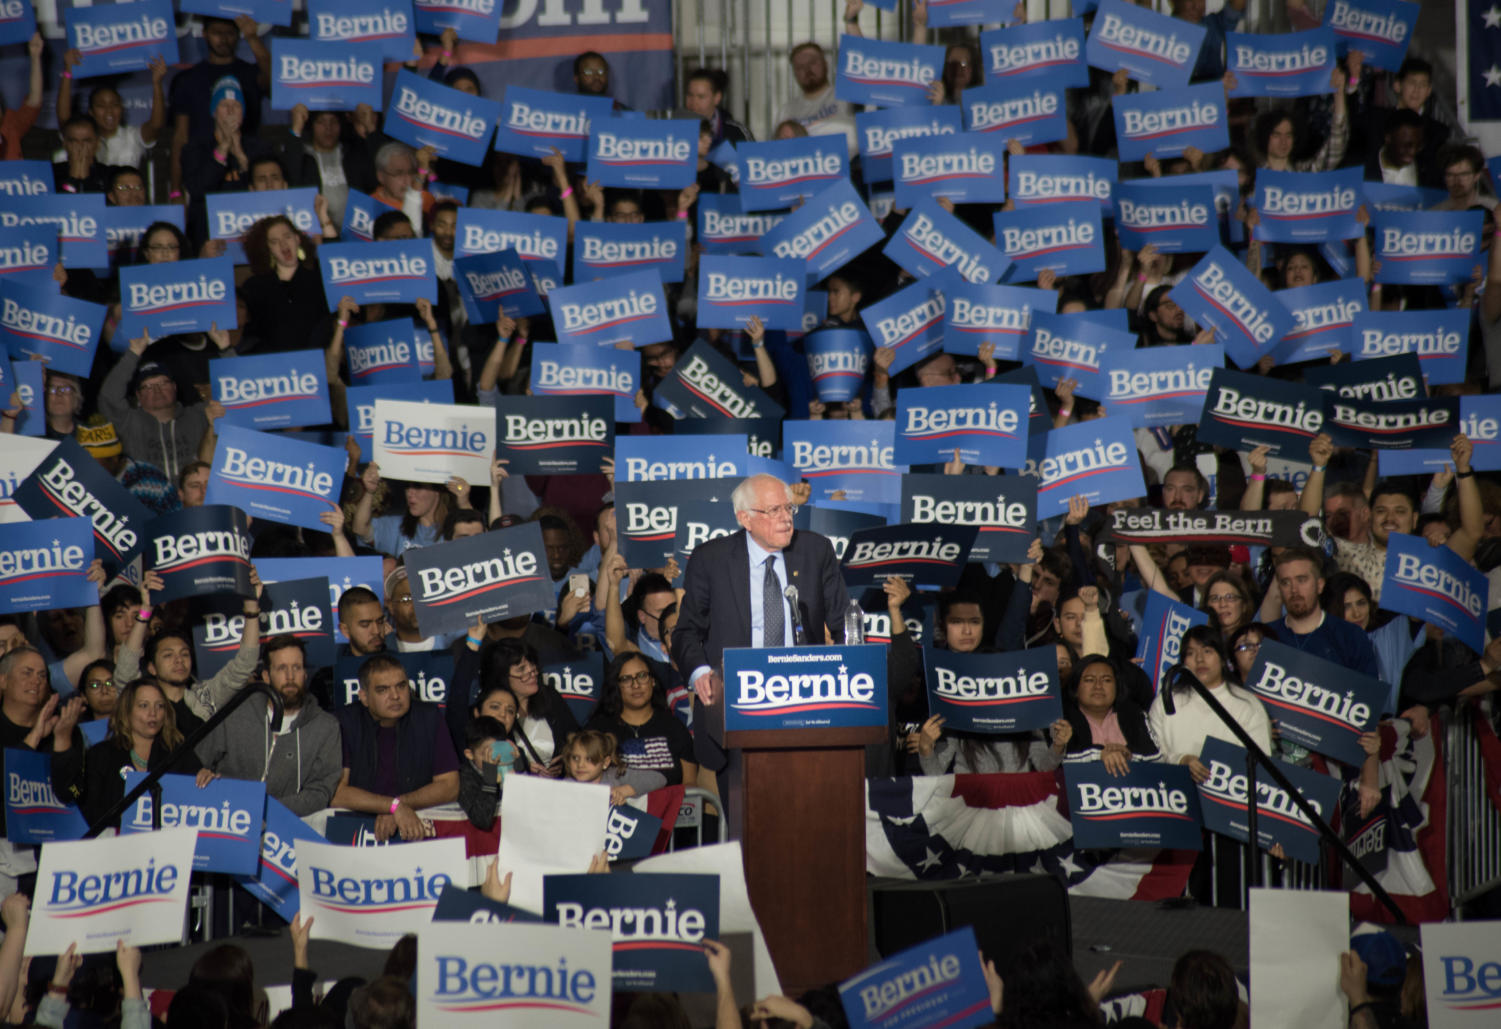 Sanders supporters at a rally hold 'Bernie' signs.